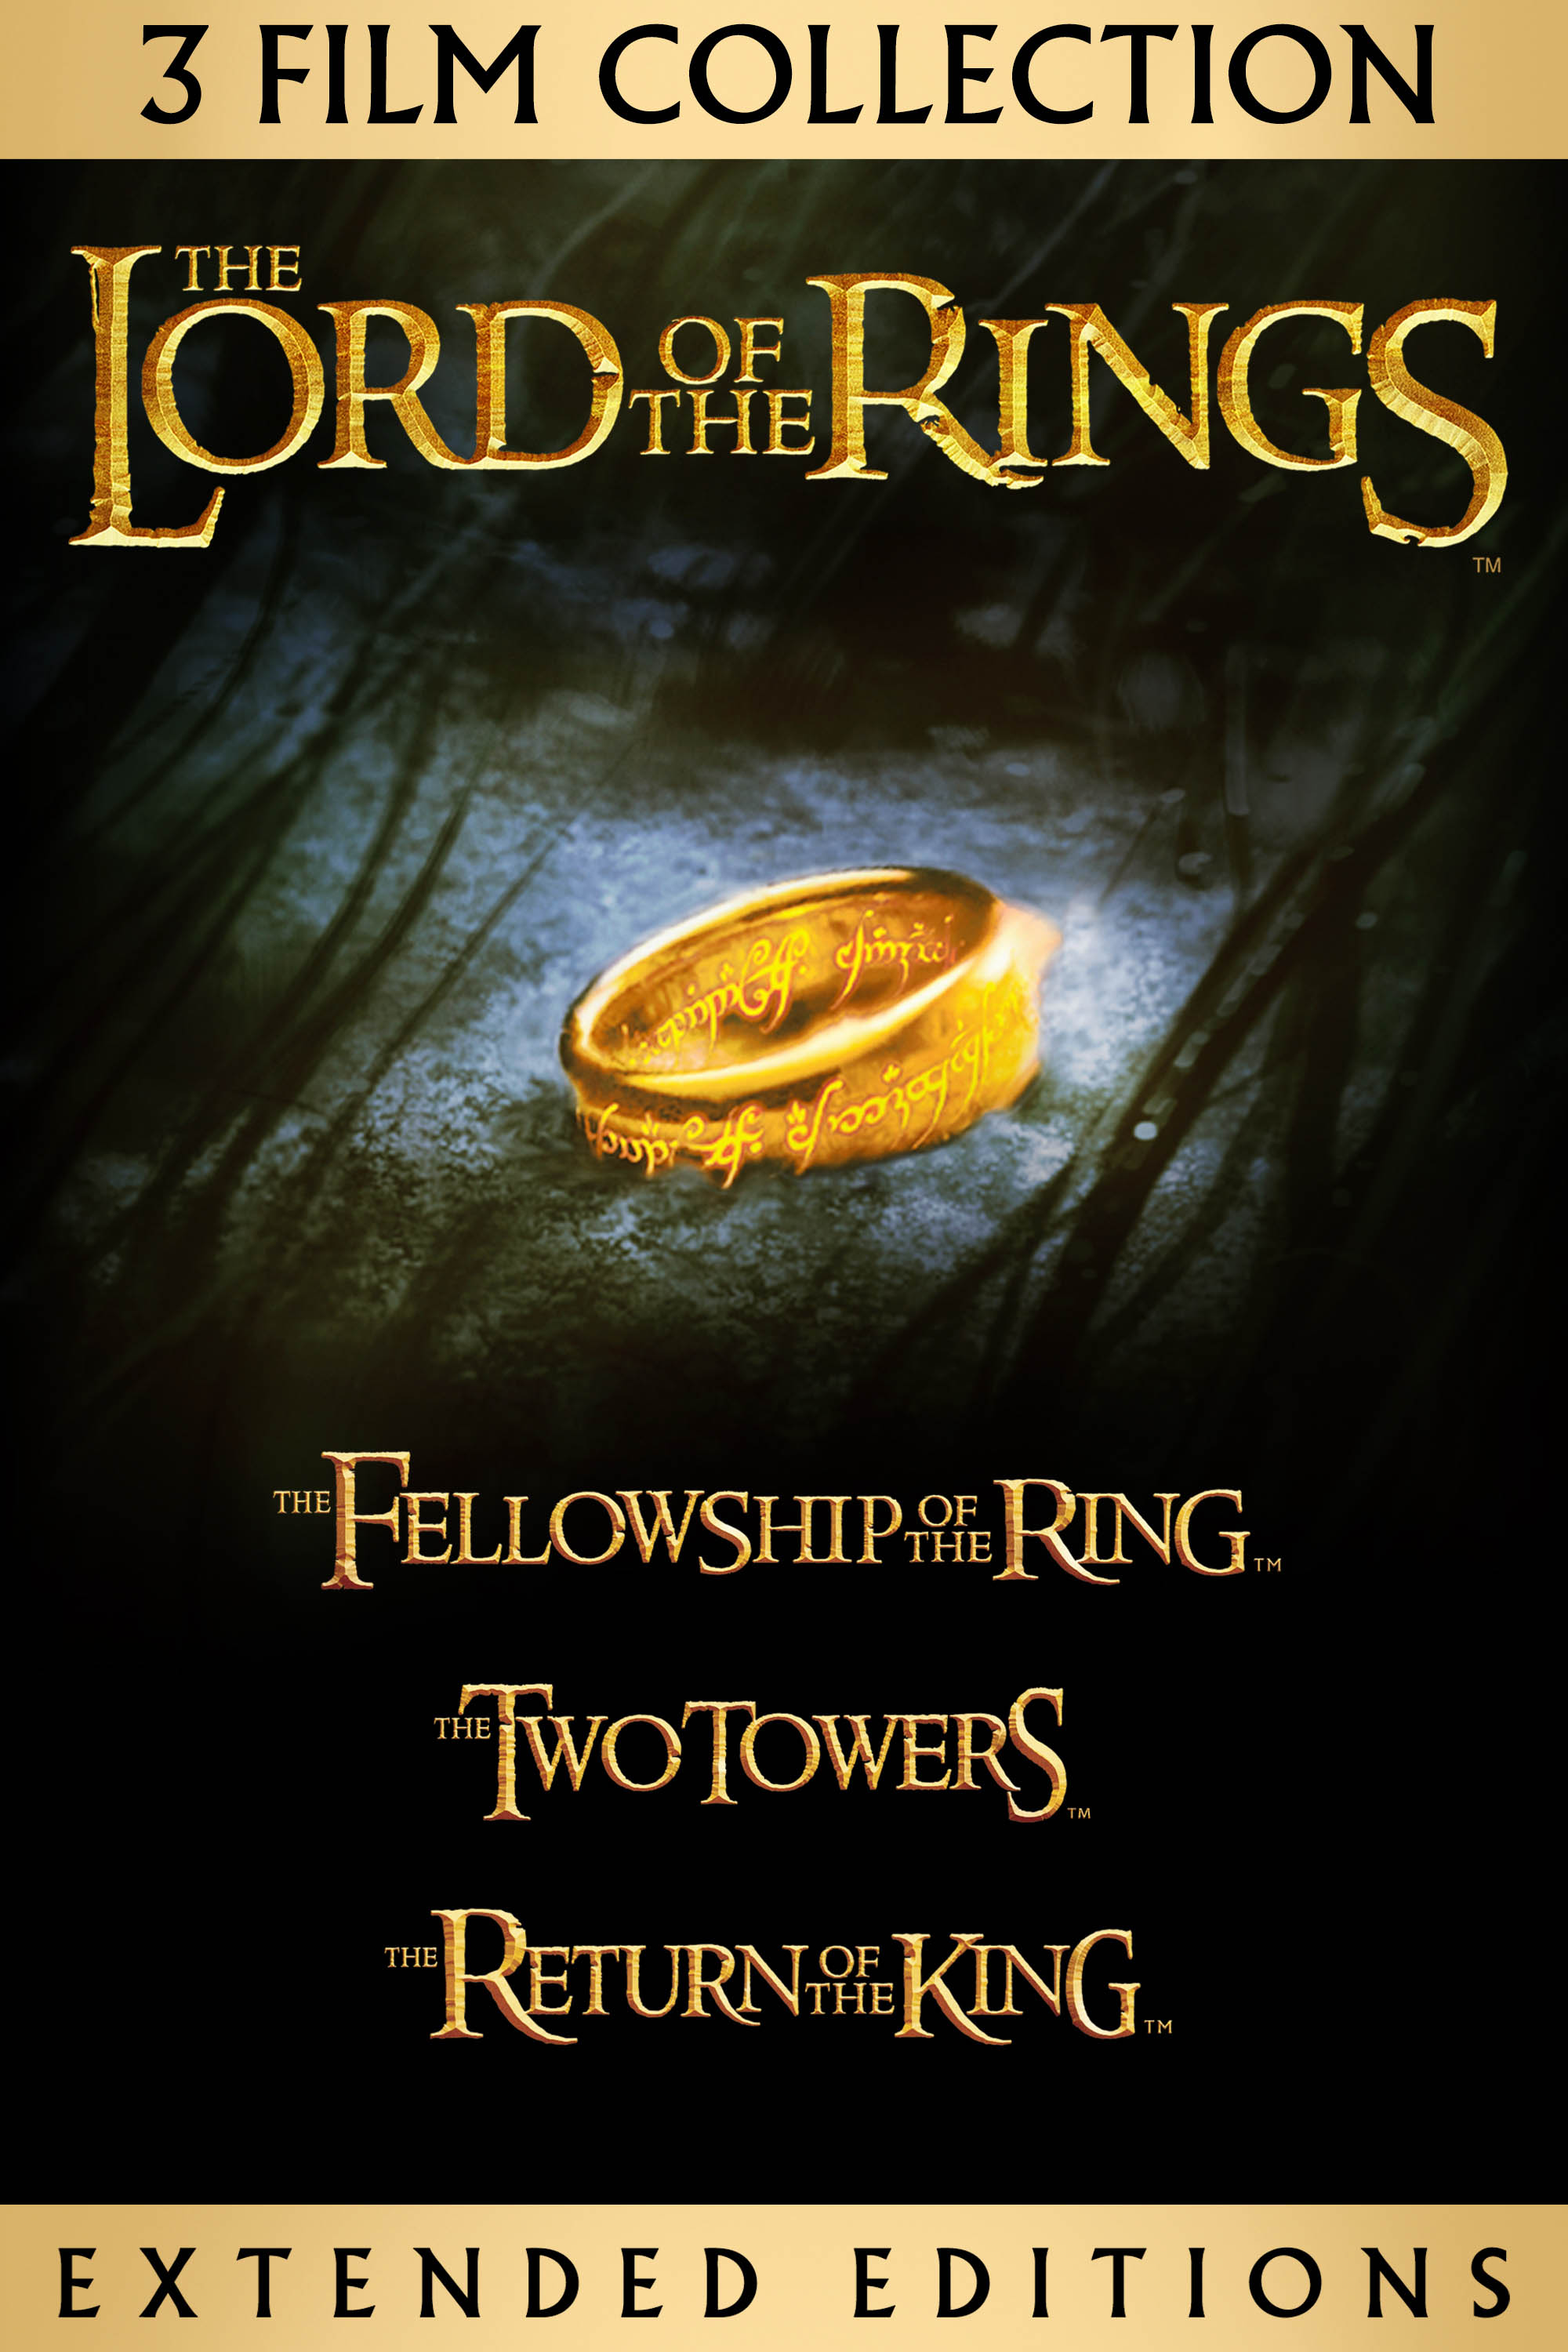 The Lord of The Rings Motion Picture Trilogy - Extended Edition at